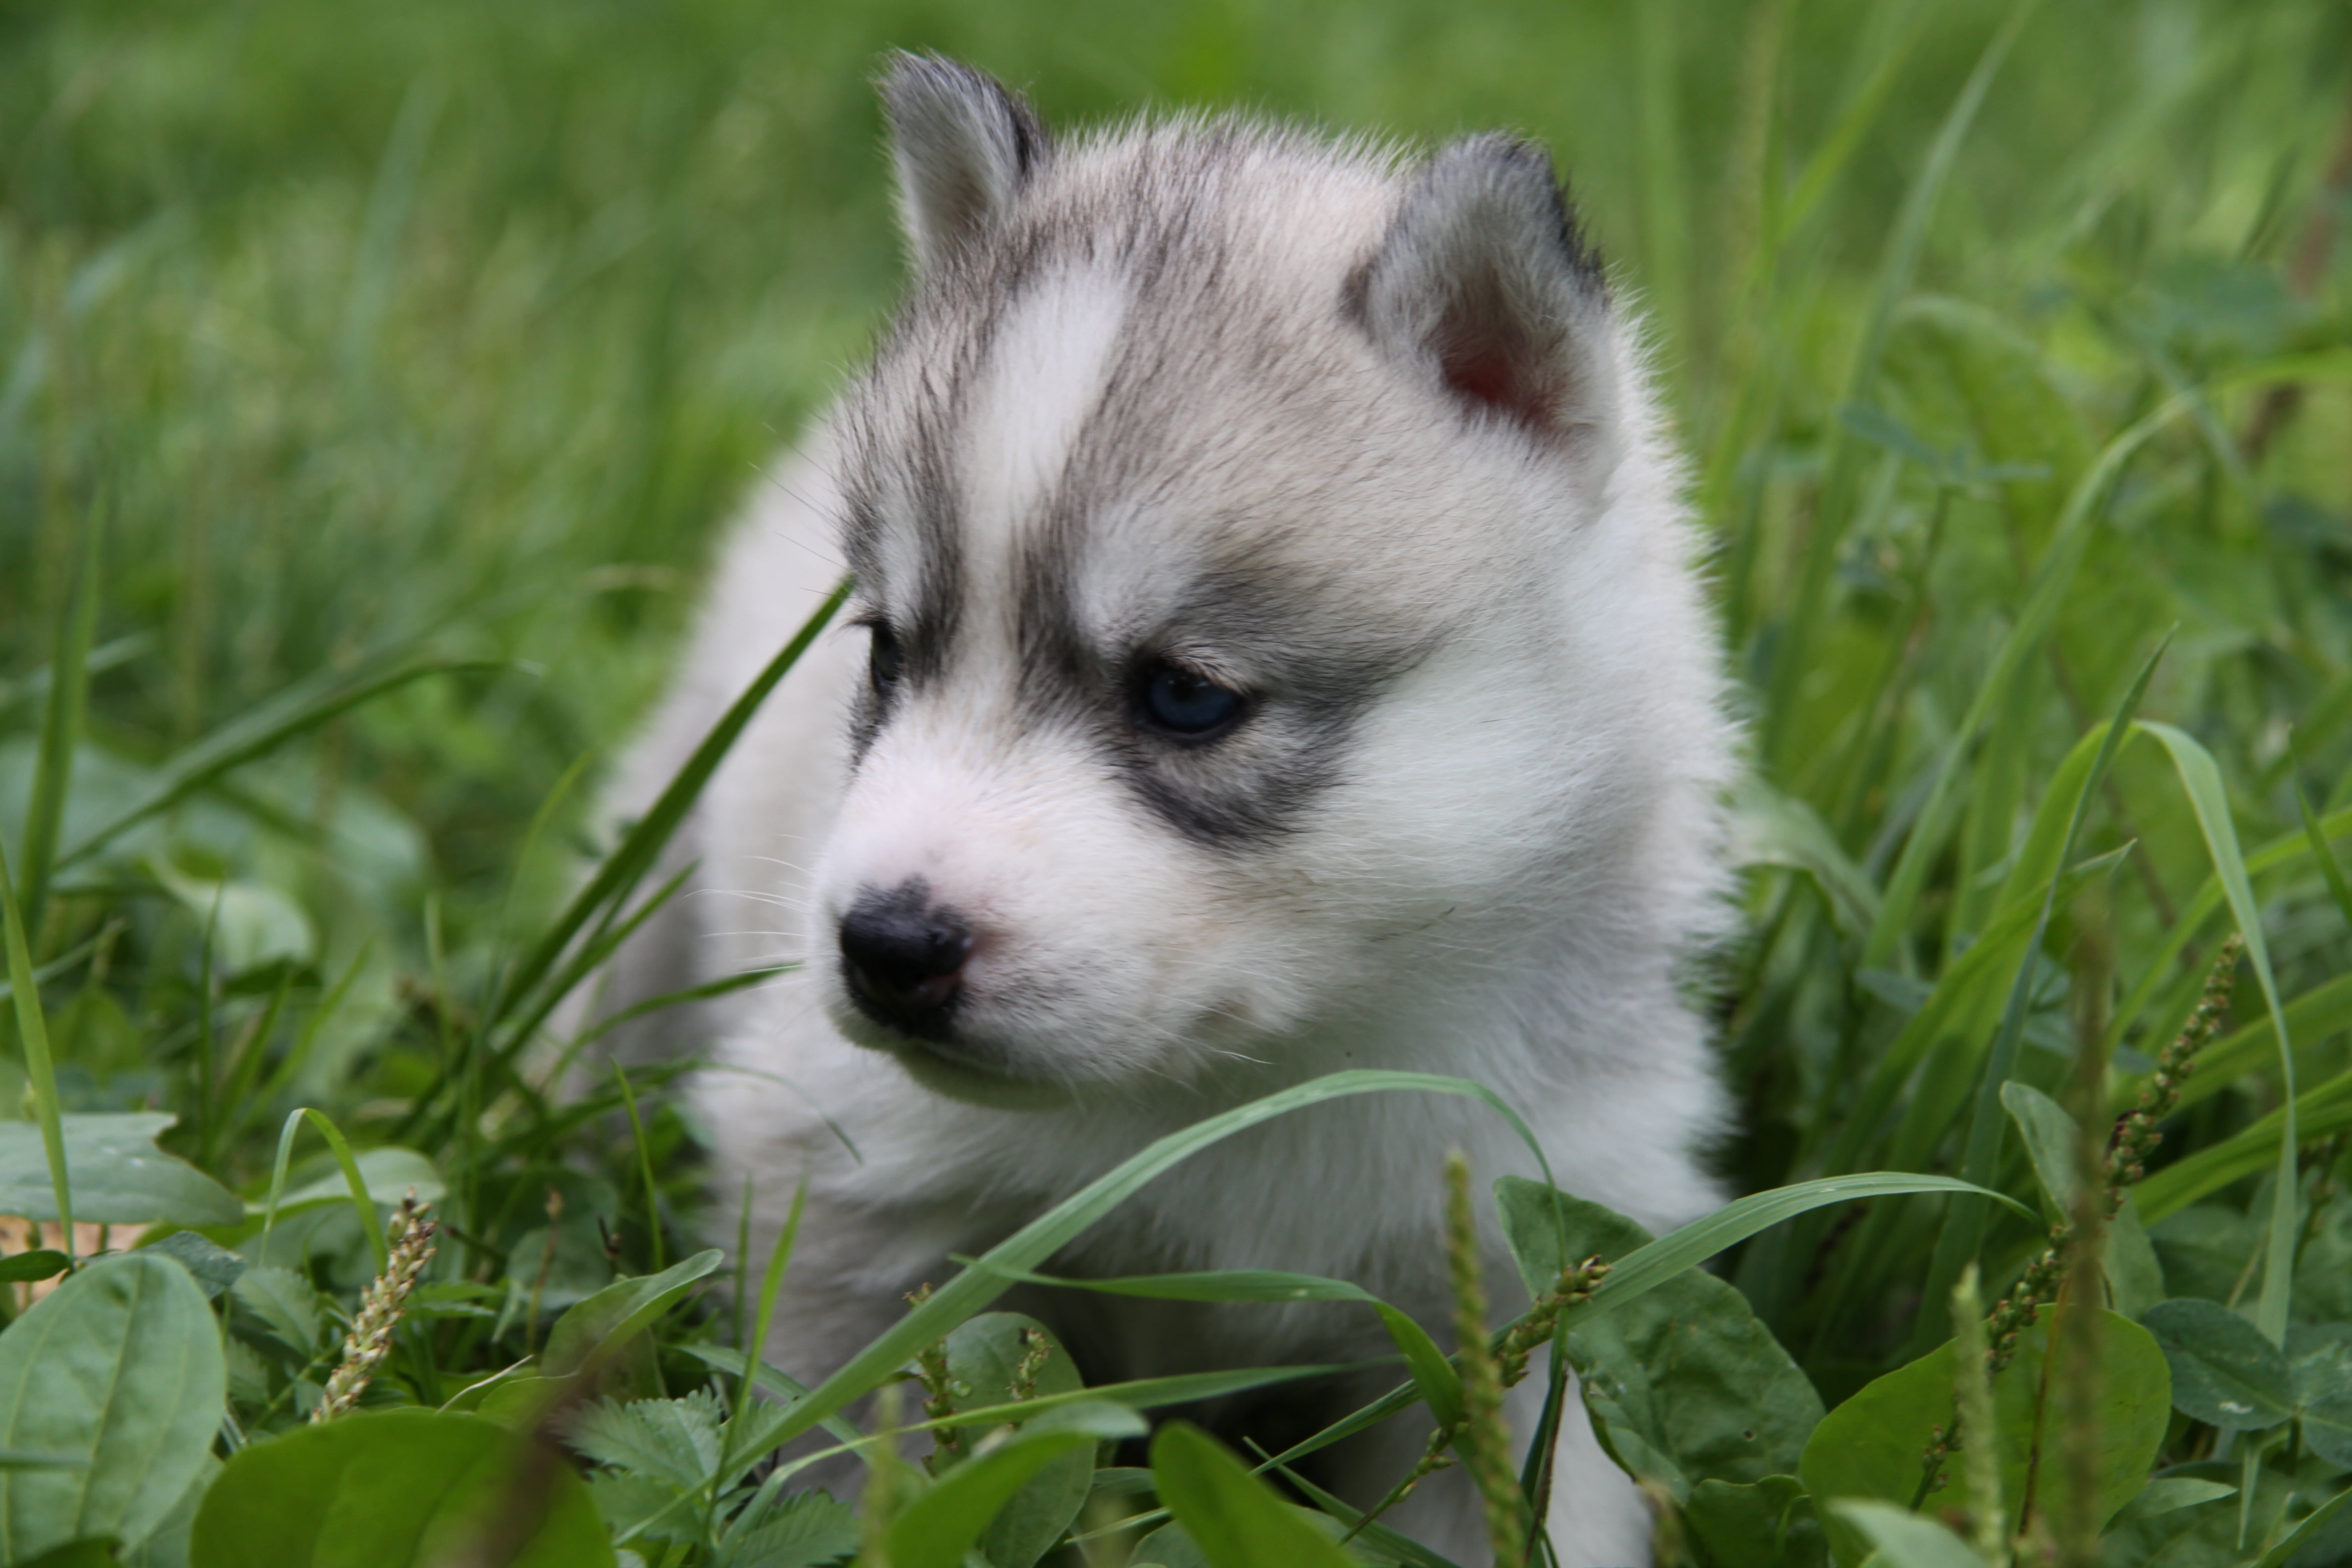 gray and white Siberian Husky puppy, face, grass, sit, sled Dog